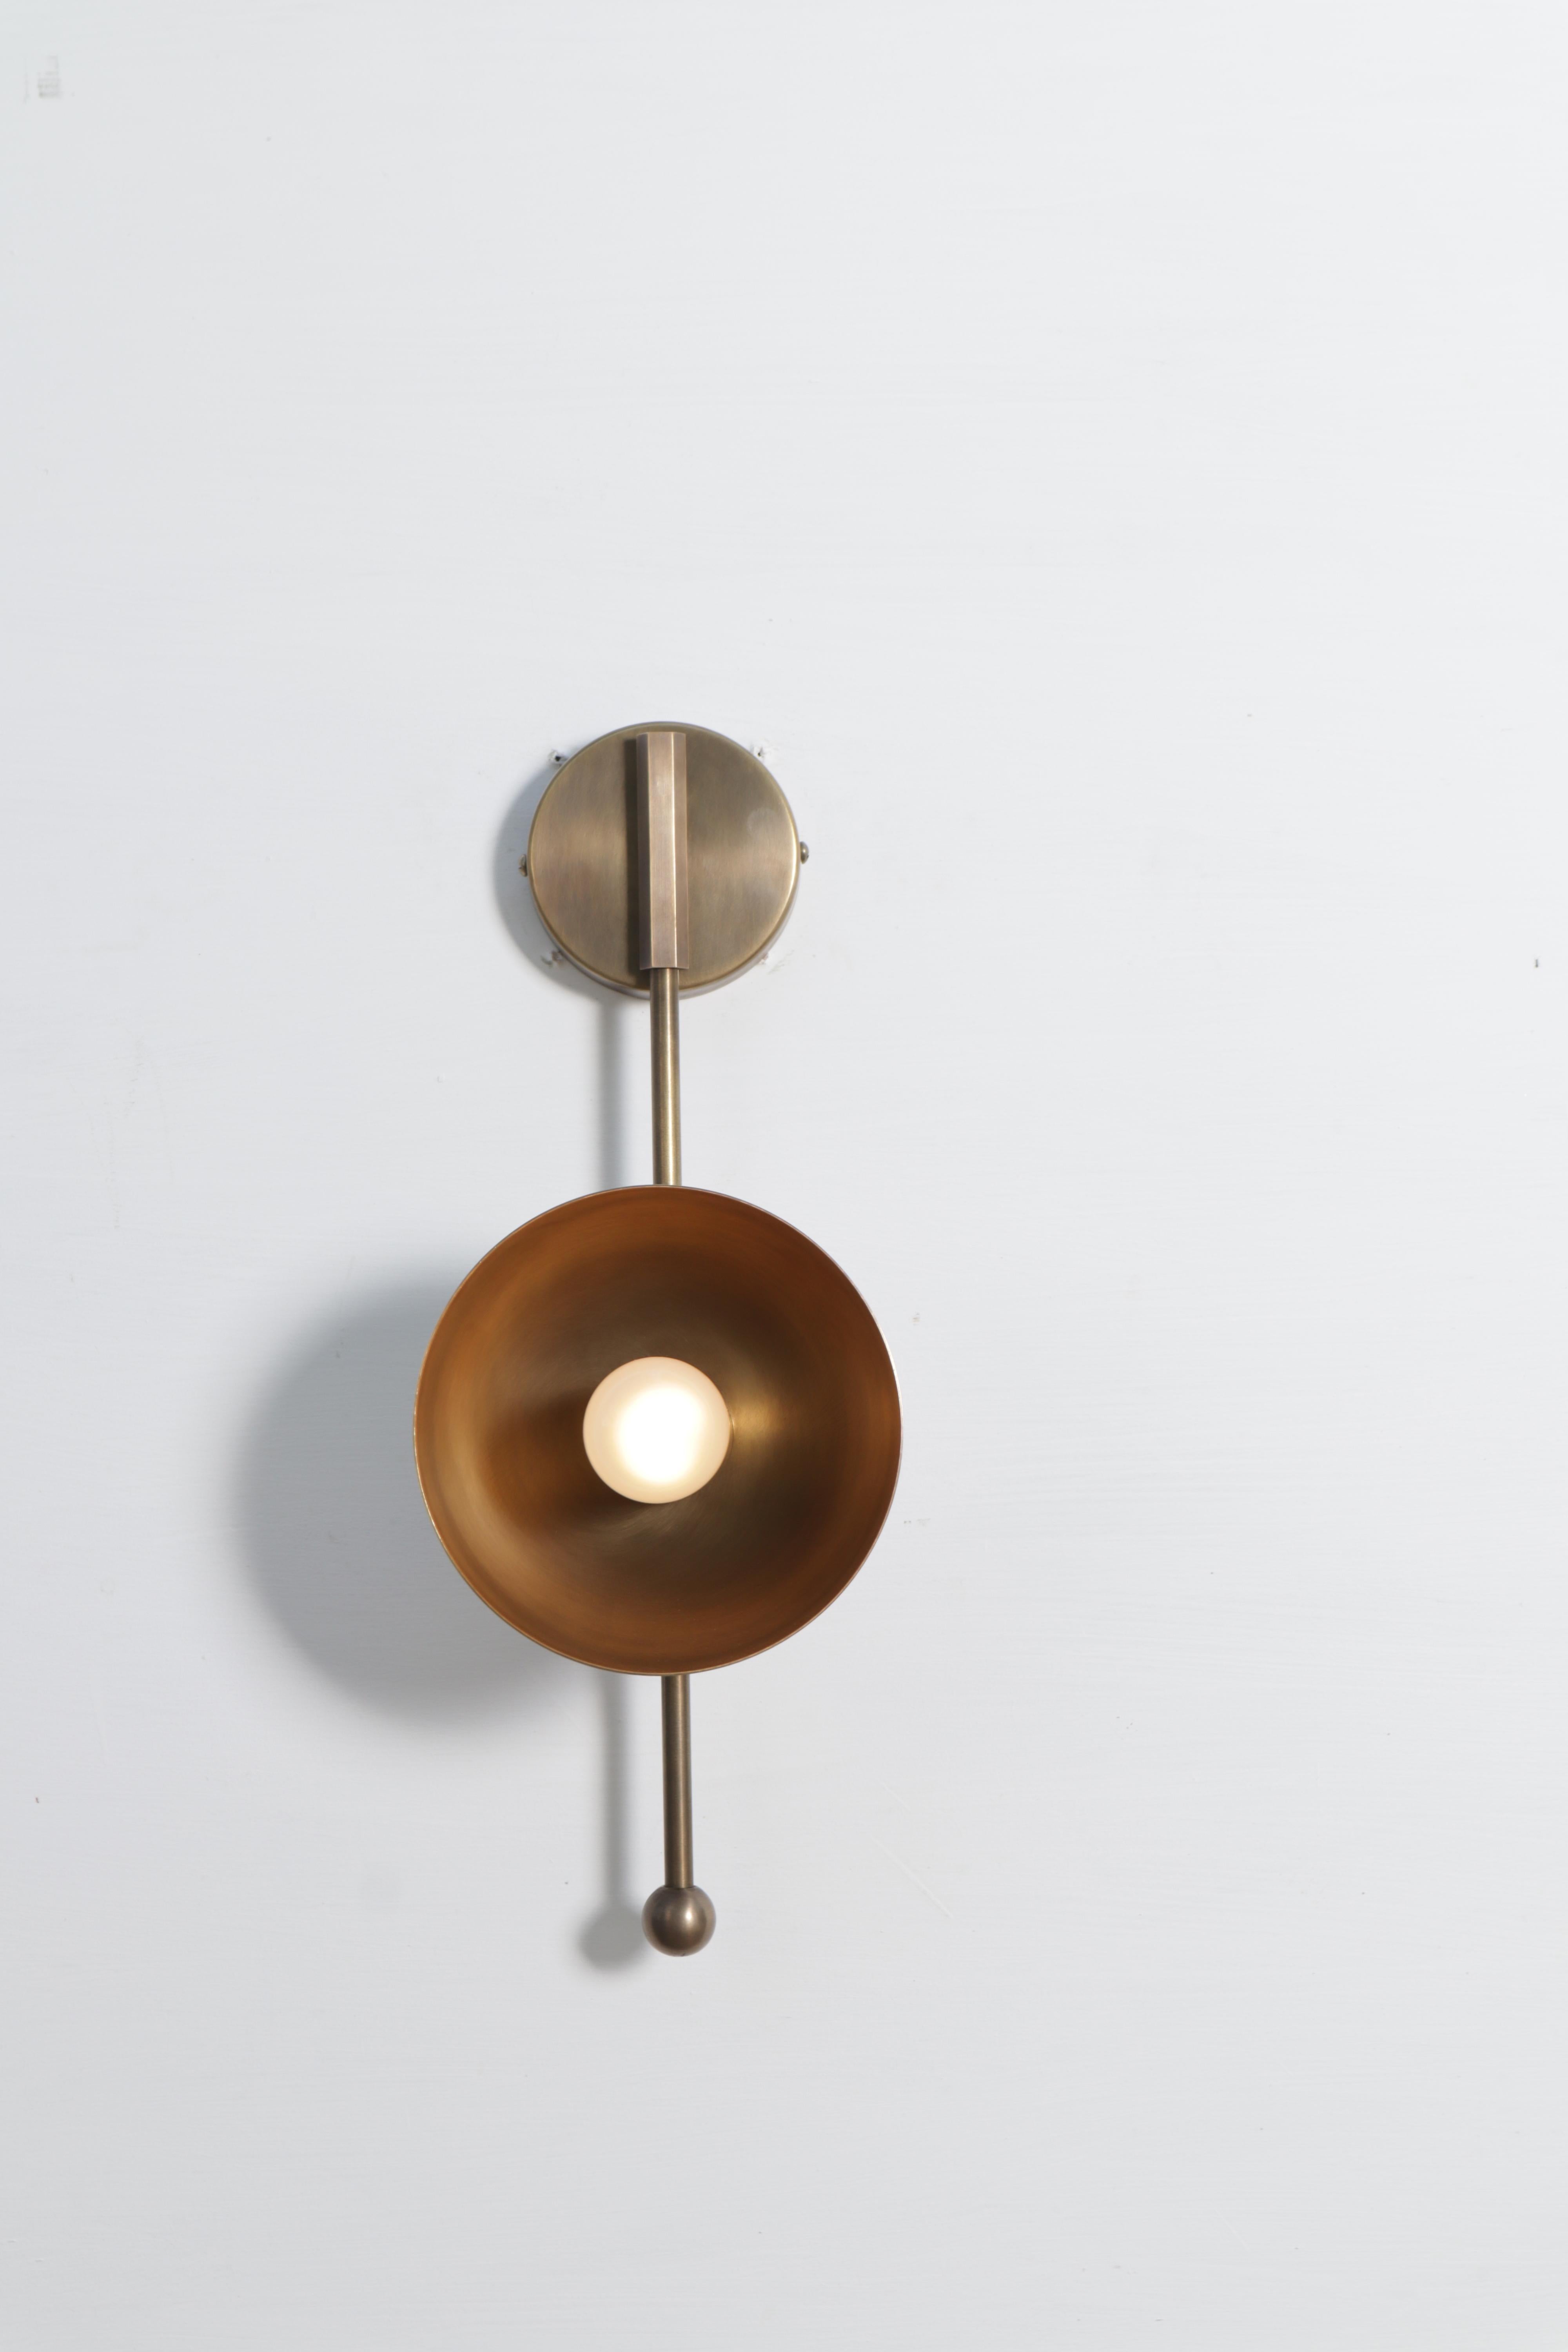 Small Drop Brass Wall Sconce Two by Lamp Shaper
Dimensions: D 15.5 x W 14 x H 41 cm.
Materials: Brass.

Different finishes available: raw brass, aged brass, burnt brass and brushed brass Please contact us.

All our lamps can be wired according to